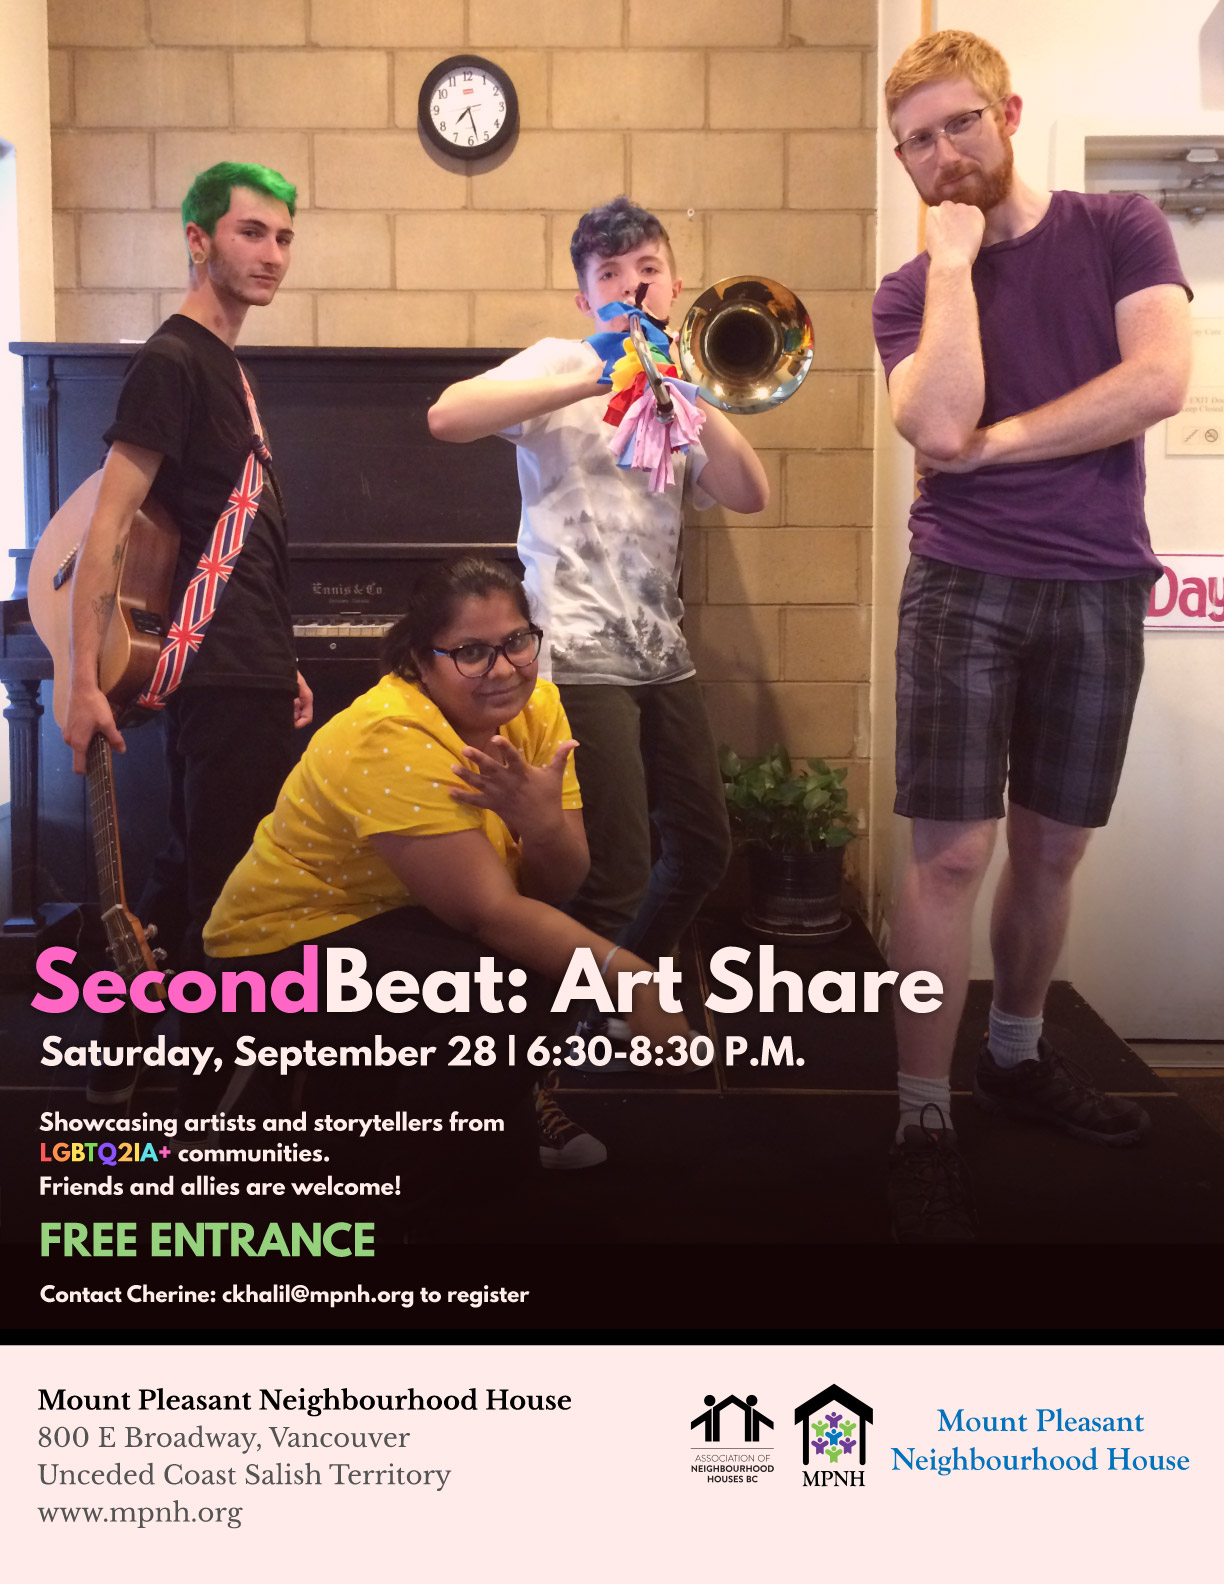 An image of the poster with event details, featuring a photo of four performers posing for a photo, one with a guitar, and one with a trombone